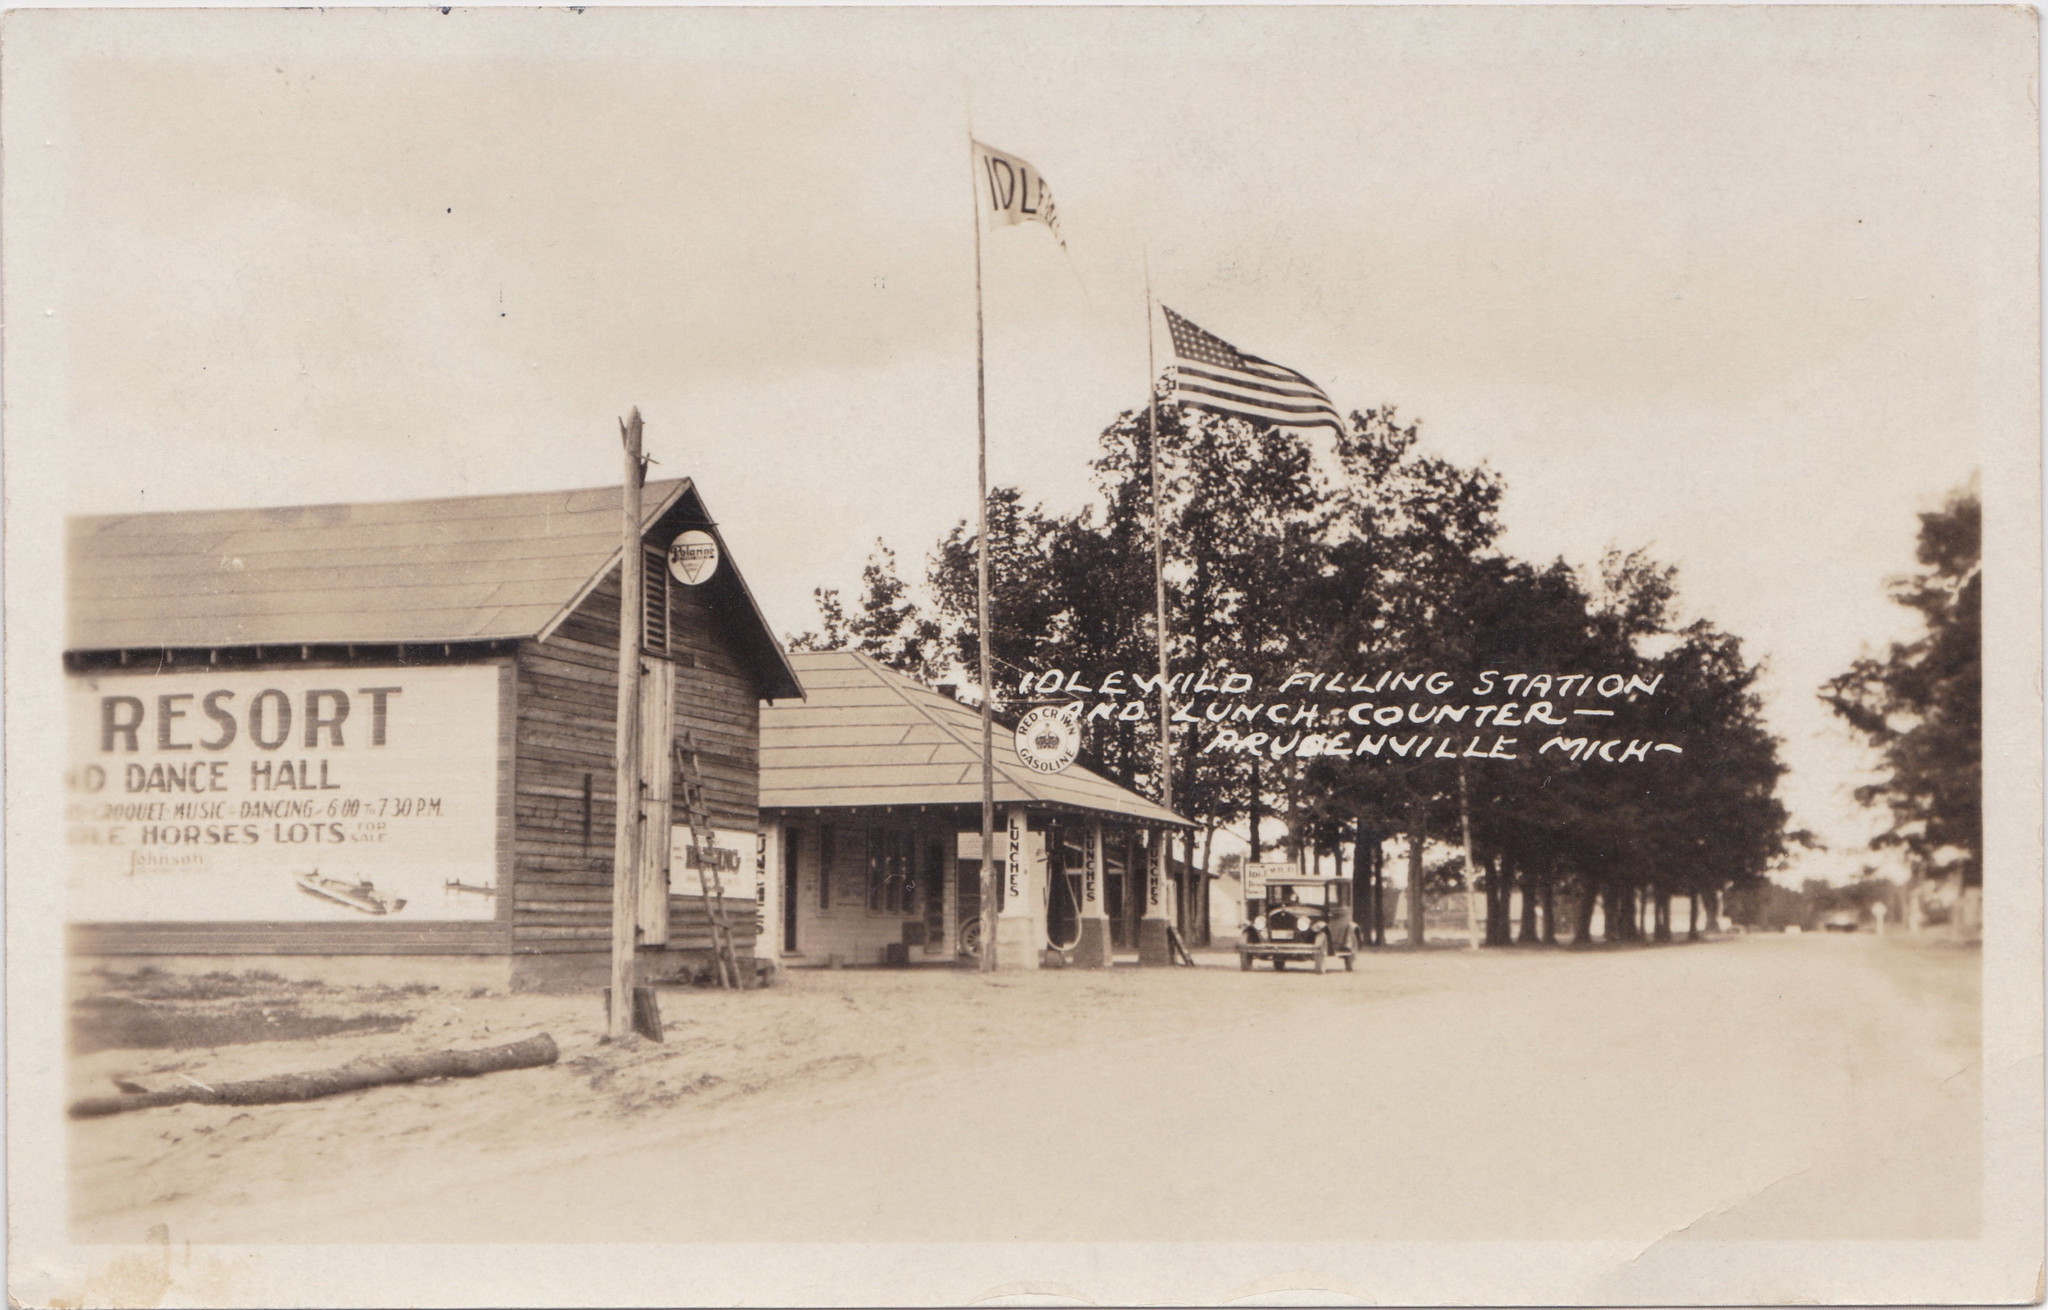 Historic Photograph of the Idlewild Filling Station and Lunch Counter